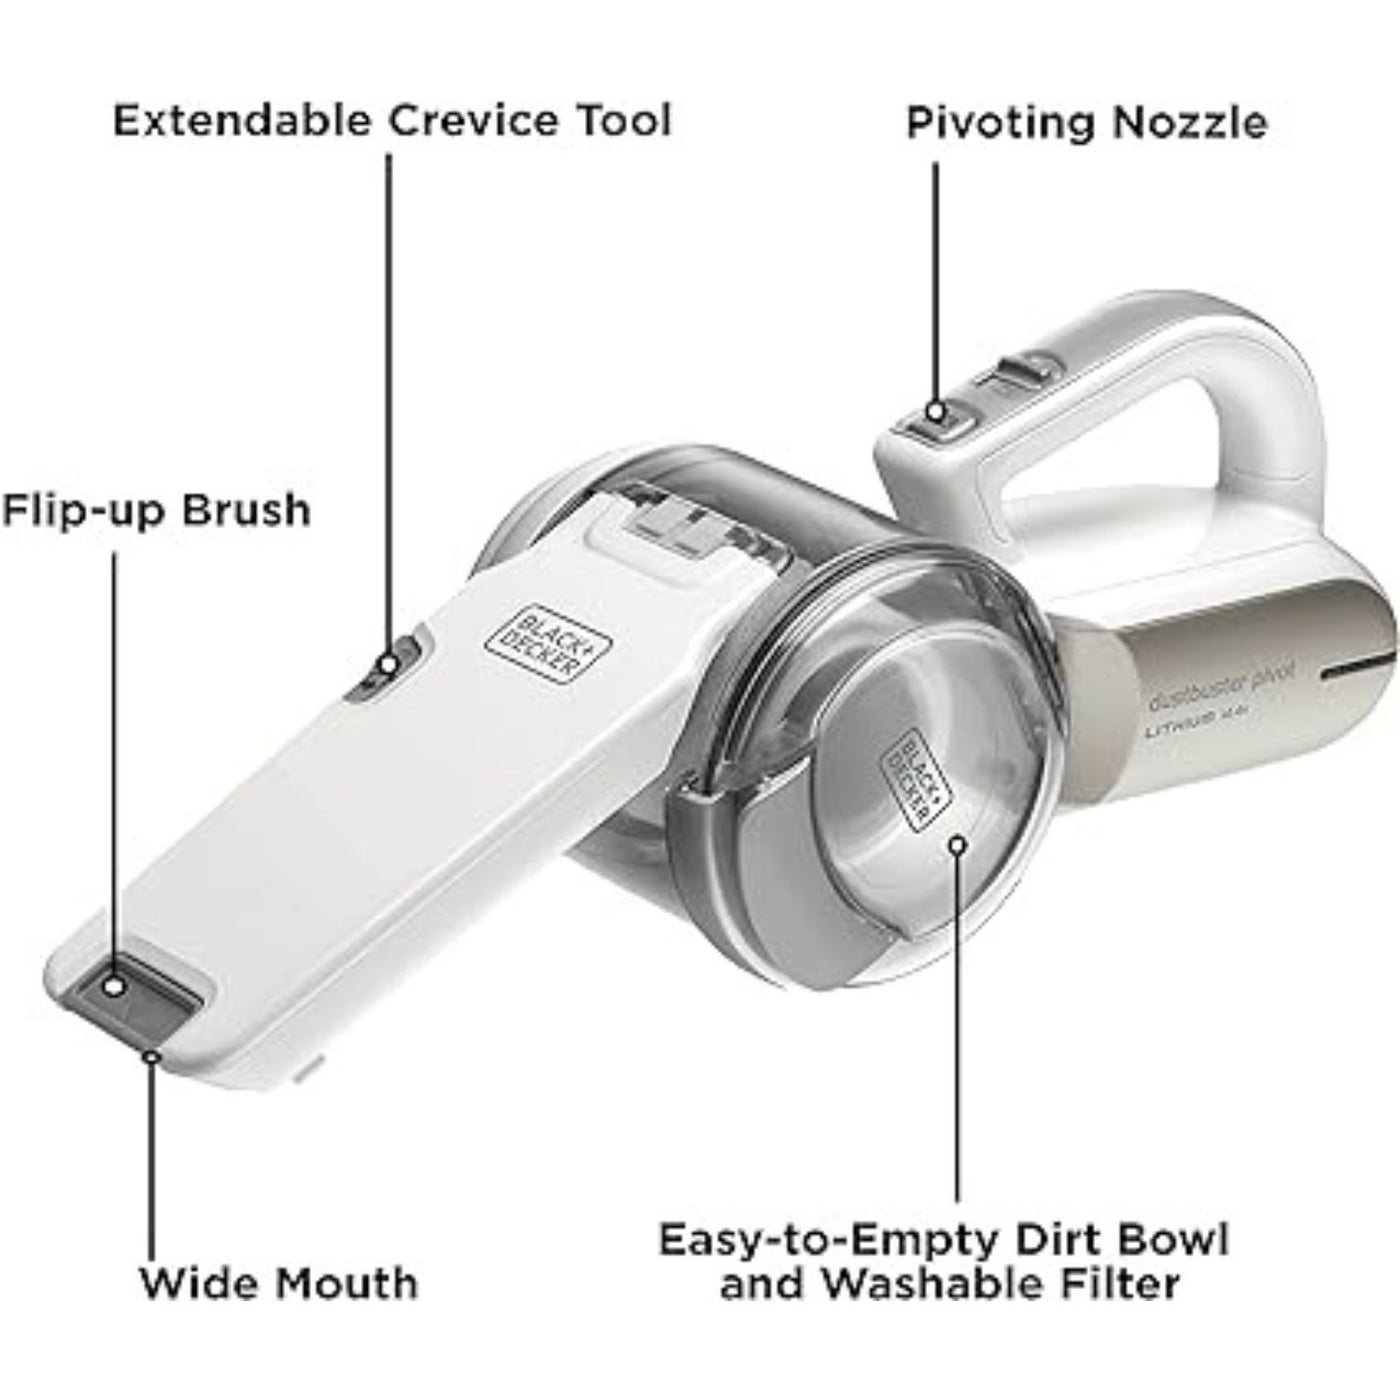 14.4V Cordless Handheld Pivot Vacuum Cleaner With 1.5Ah Li-Ion Battery, 440ml Bowl Capacity And Triple Filteration With 200° Rotation